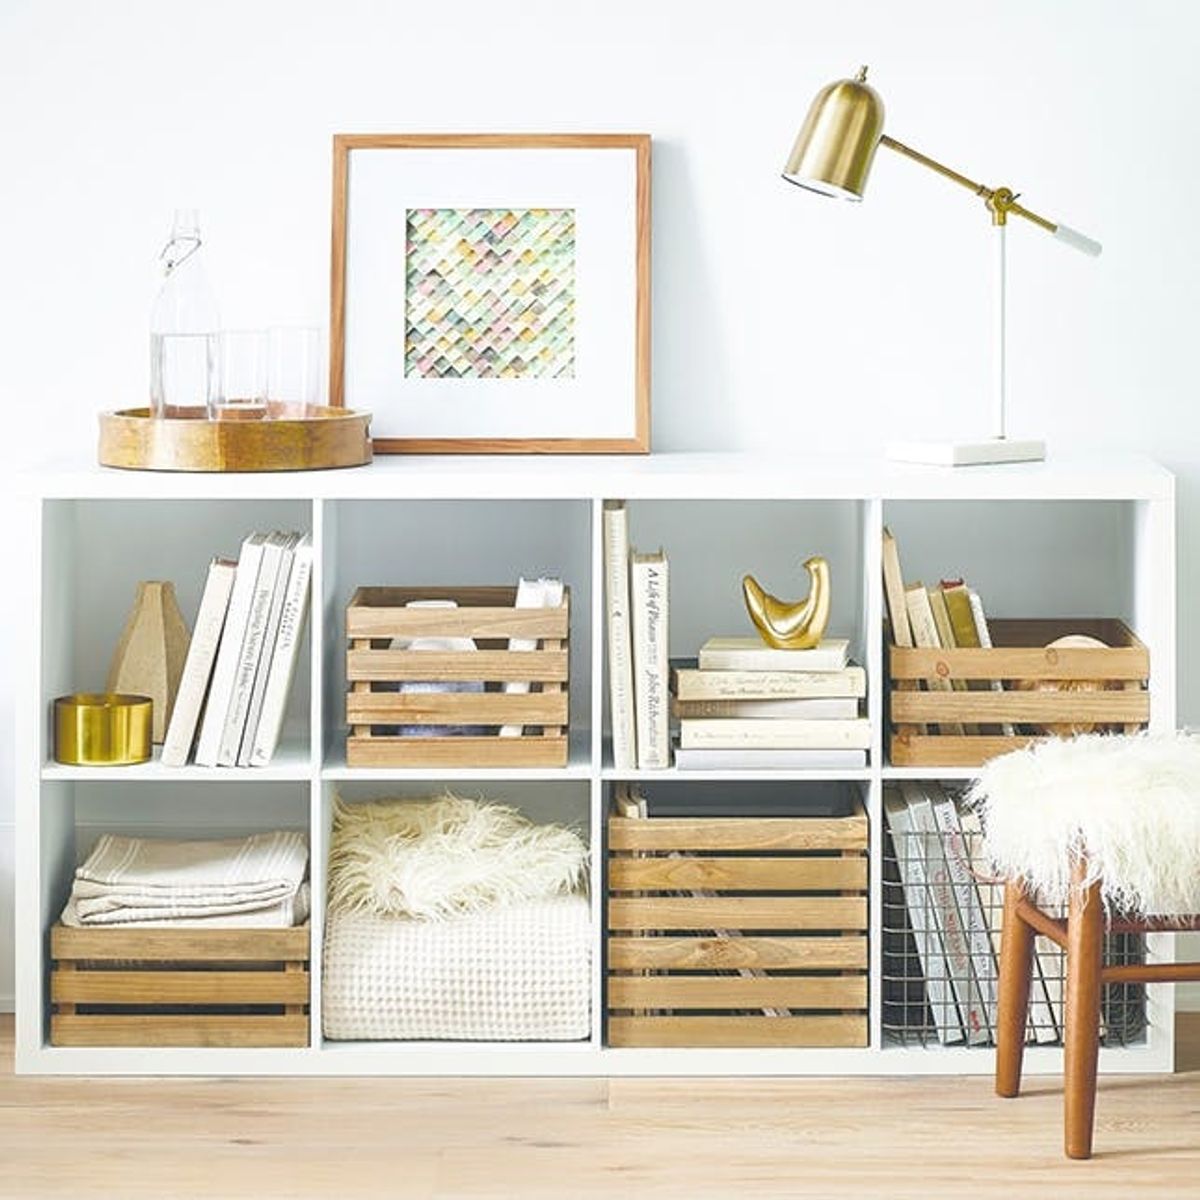 Our Top 15 Target Organization Buys to Tidy Up Your Life